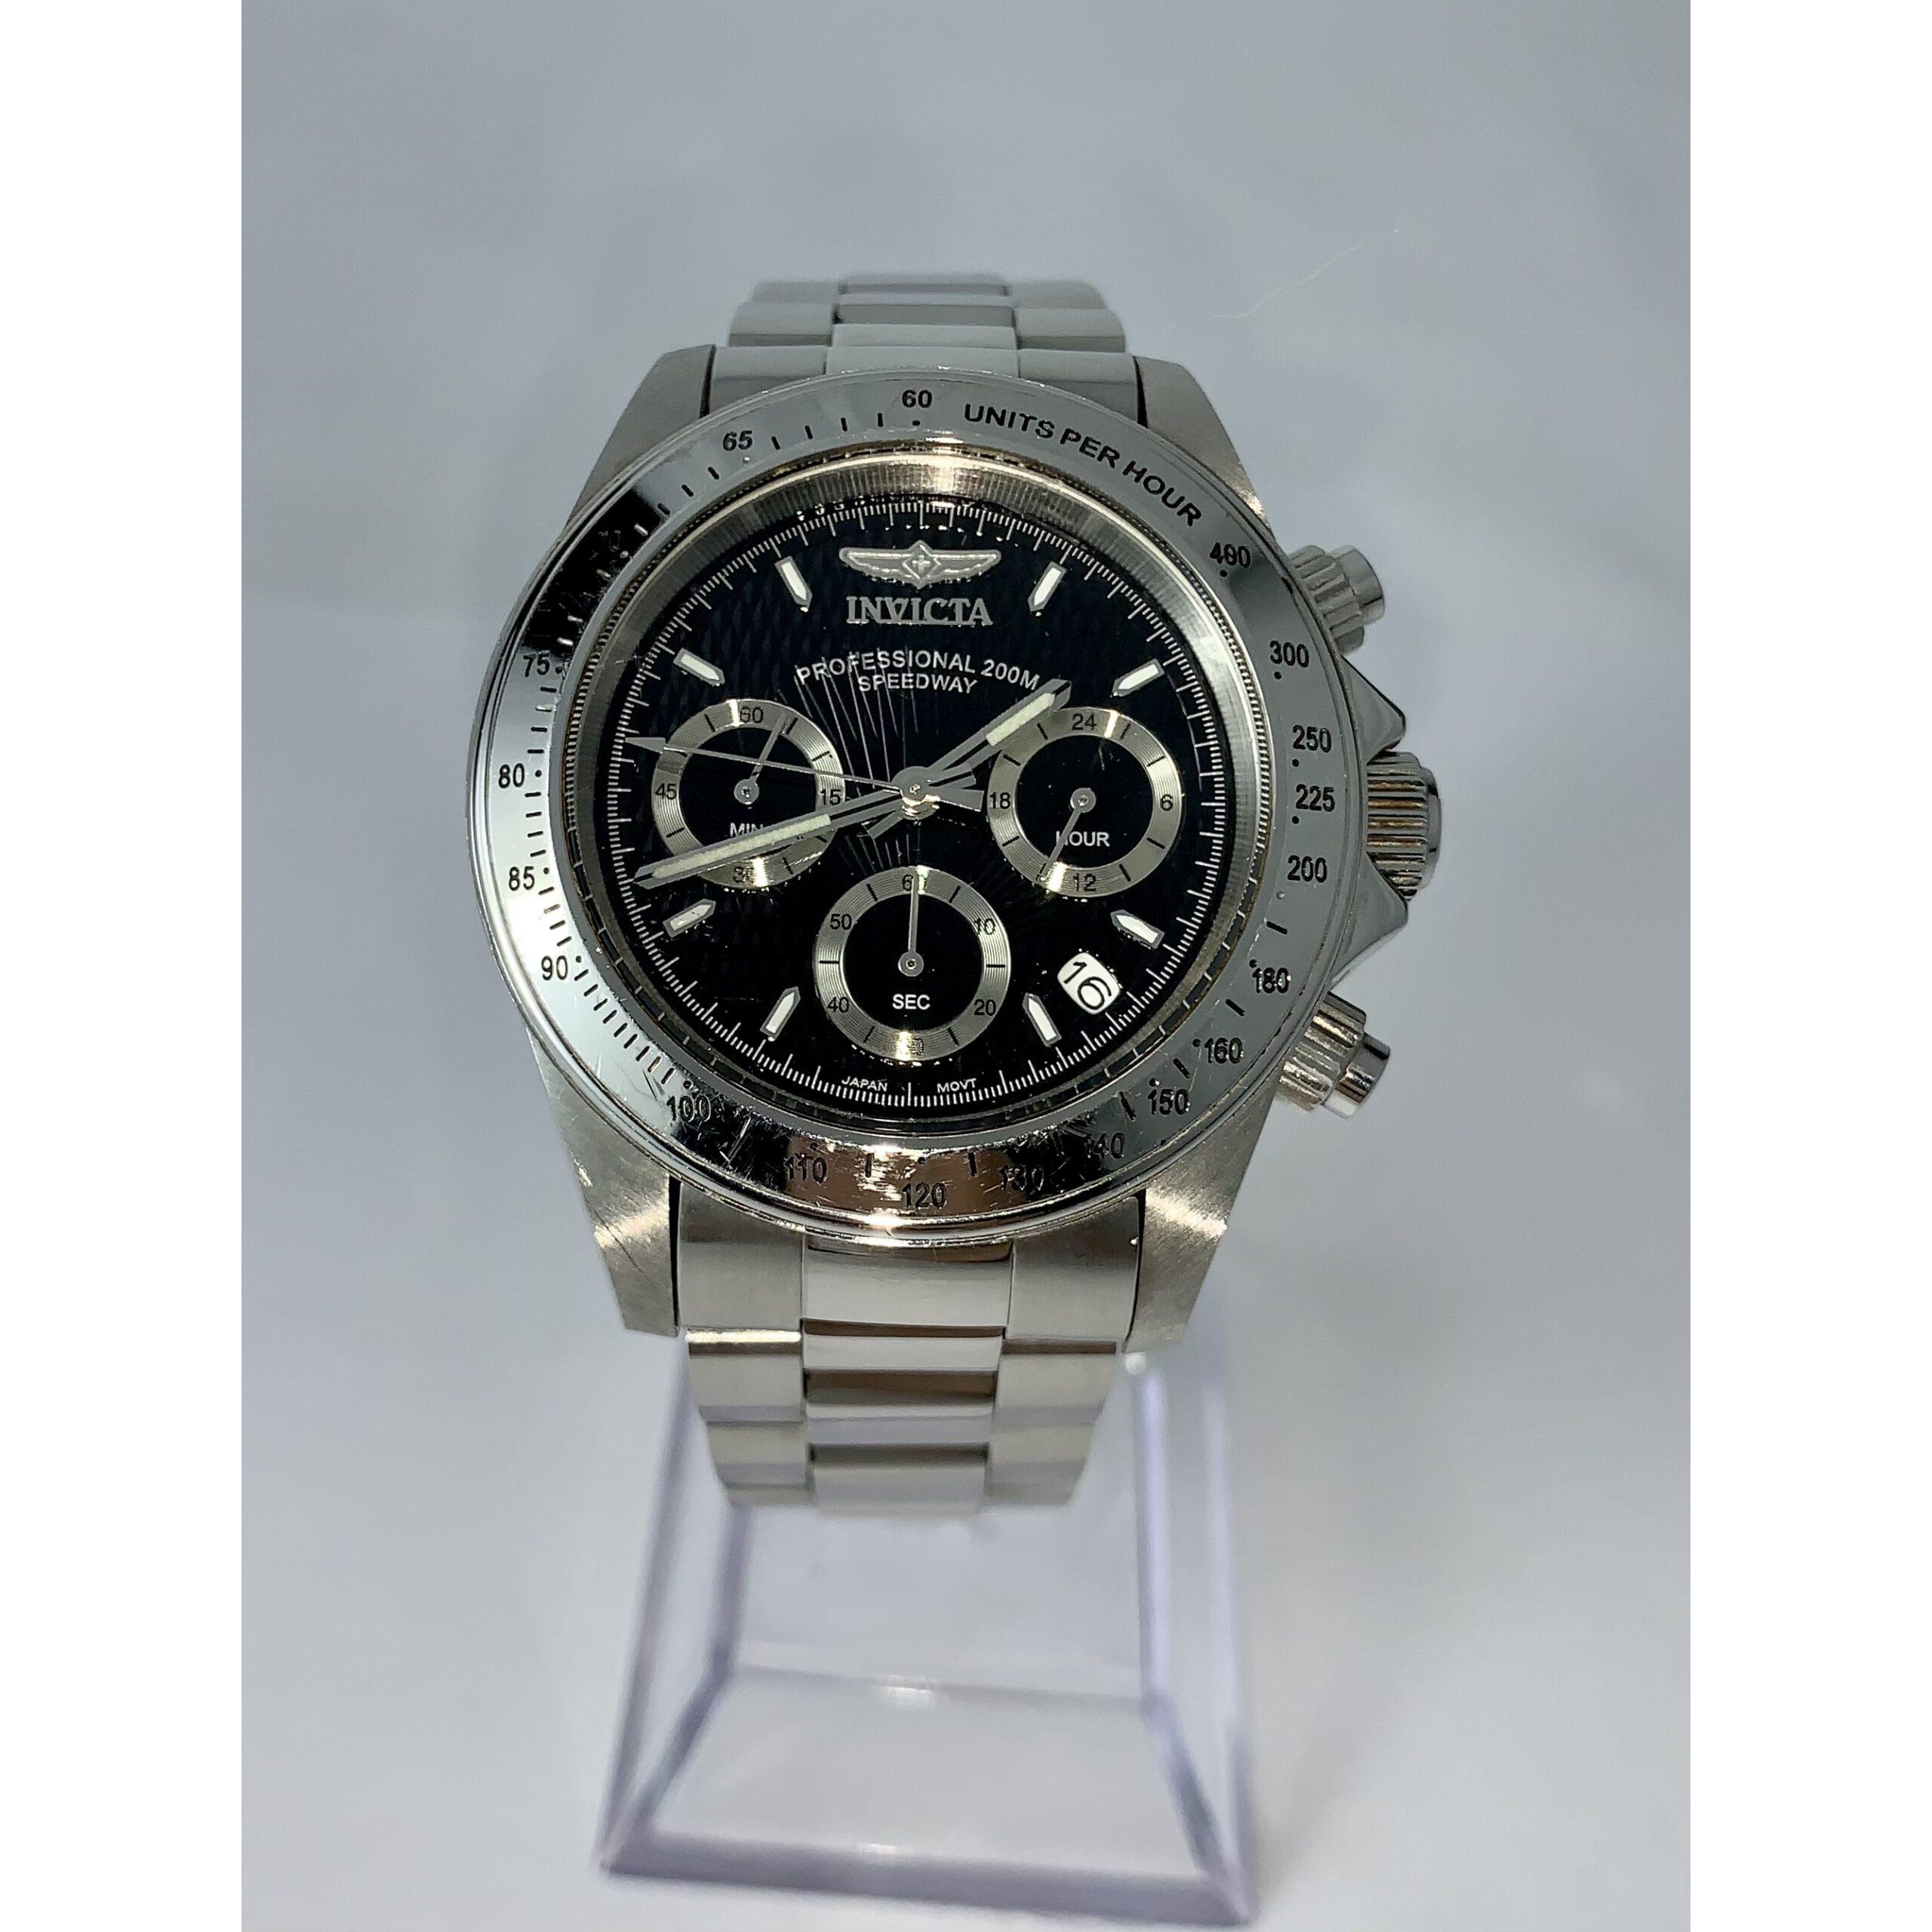 Udråbstegn serviet Vær forsigtig Invicta Professional Speedway Chronograph Stainless Steel Watch - 9223 |  Barry's Pawn and Jewelry